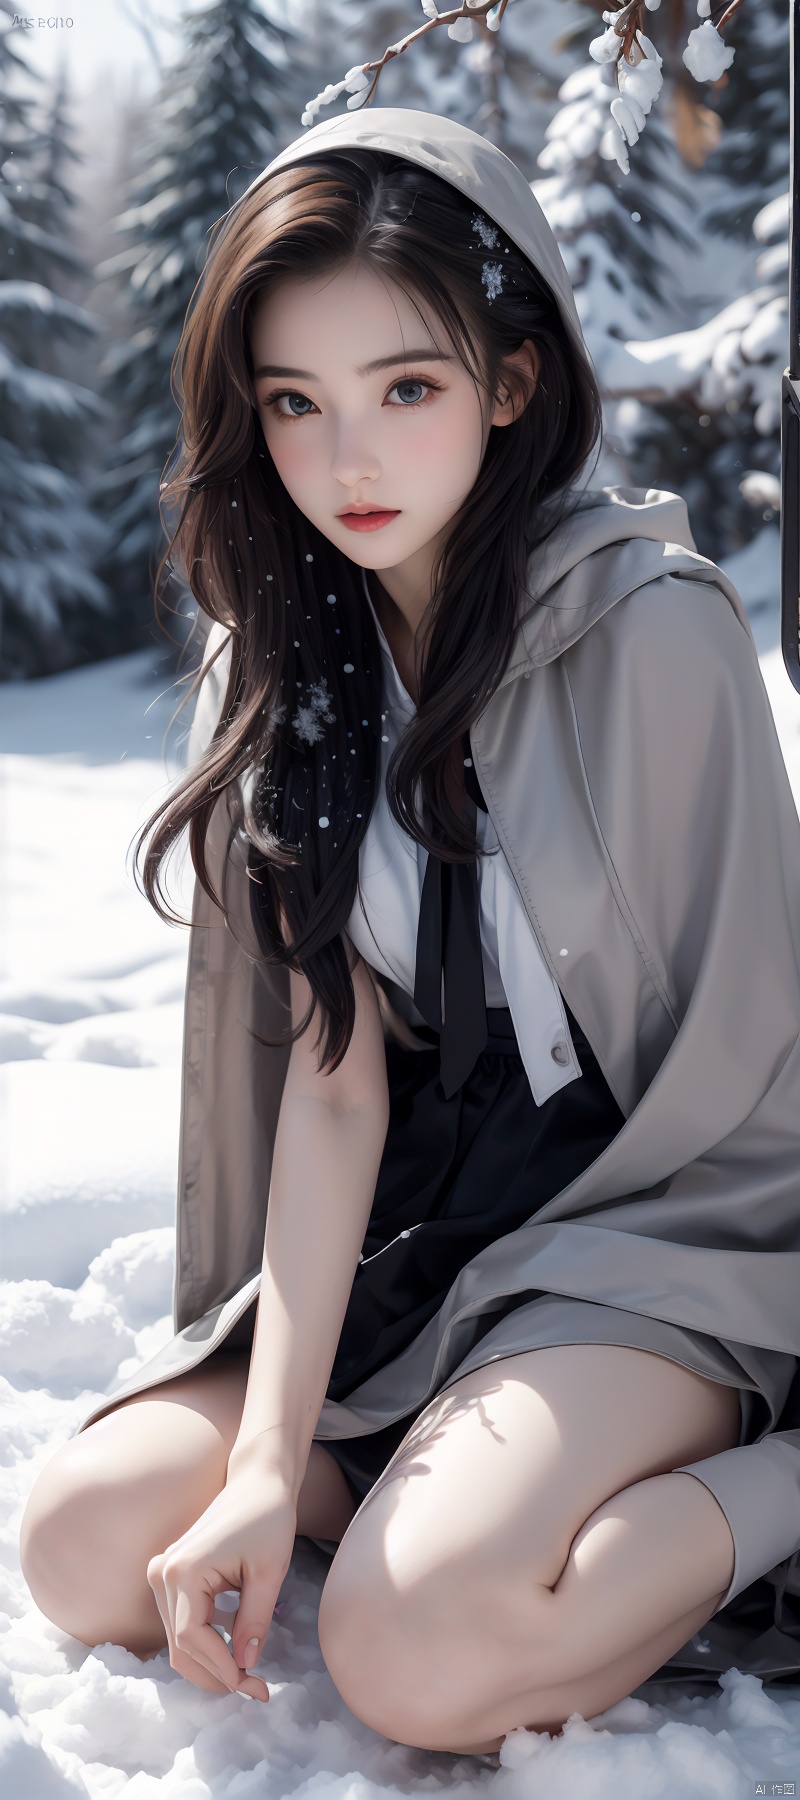 （8K, RAW photos, best qualtiy, tmasterpiece：1.2）,（realisticlying, photograph realistic：1.4)
Lolita costume,Lace, Aerith Gainsborough, sat on the ground,(Cloak,do lado de fora,Cover with snow,snowfield) high high quality, highdetailskin, looking at viewert,